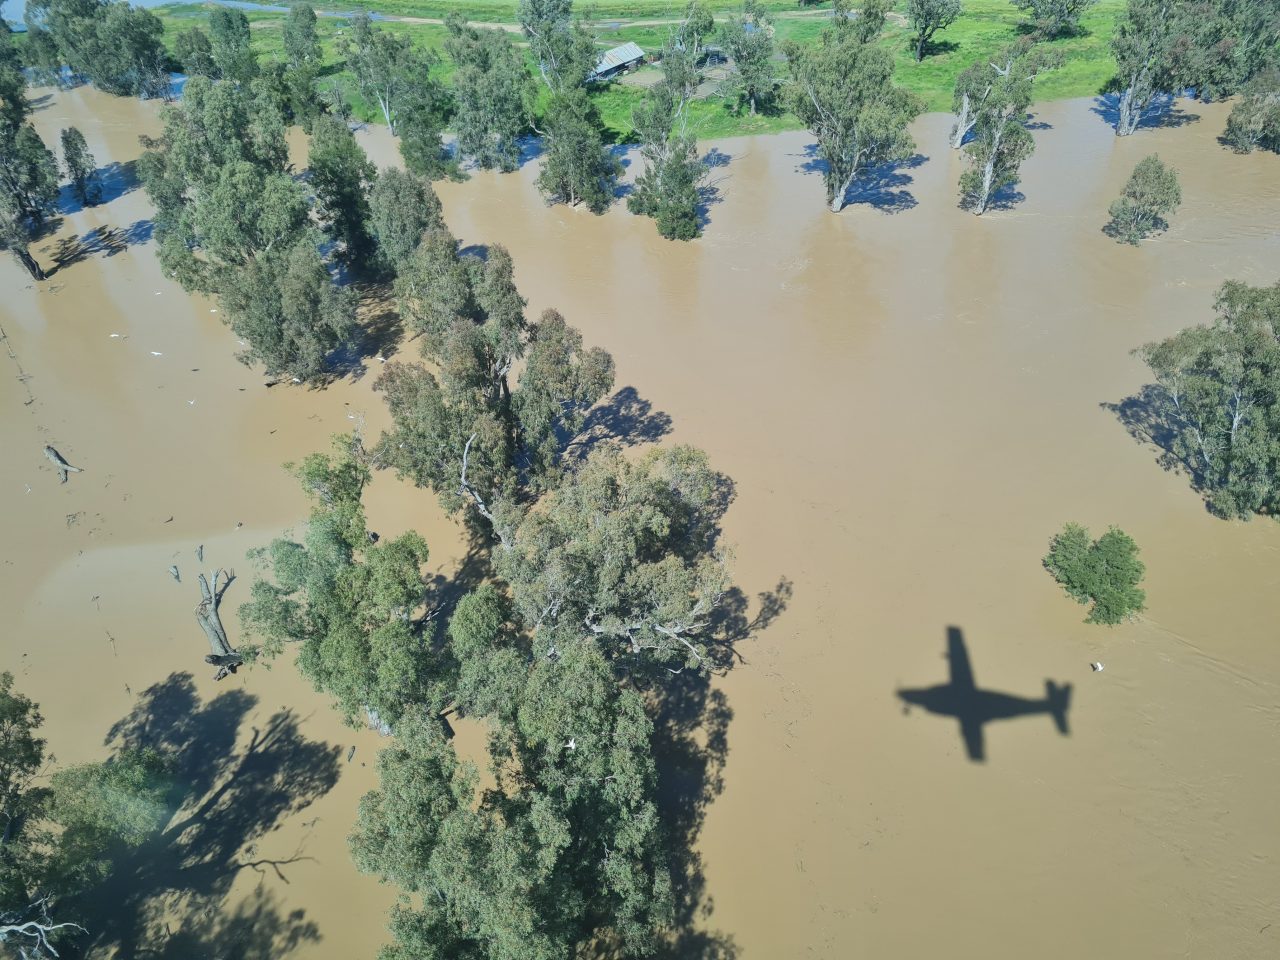 Aerial photo of river flowing over it's banks onto the lush green floodplian, there are trees in the water being inundated, the water is light brown. There is a barn and several livestock yards on the floodplain,  at risk of being submerged. The shadow of the plane is on the water in foreground, it is a sunny day.